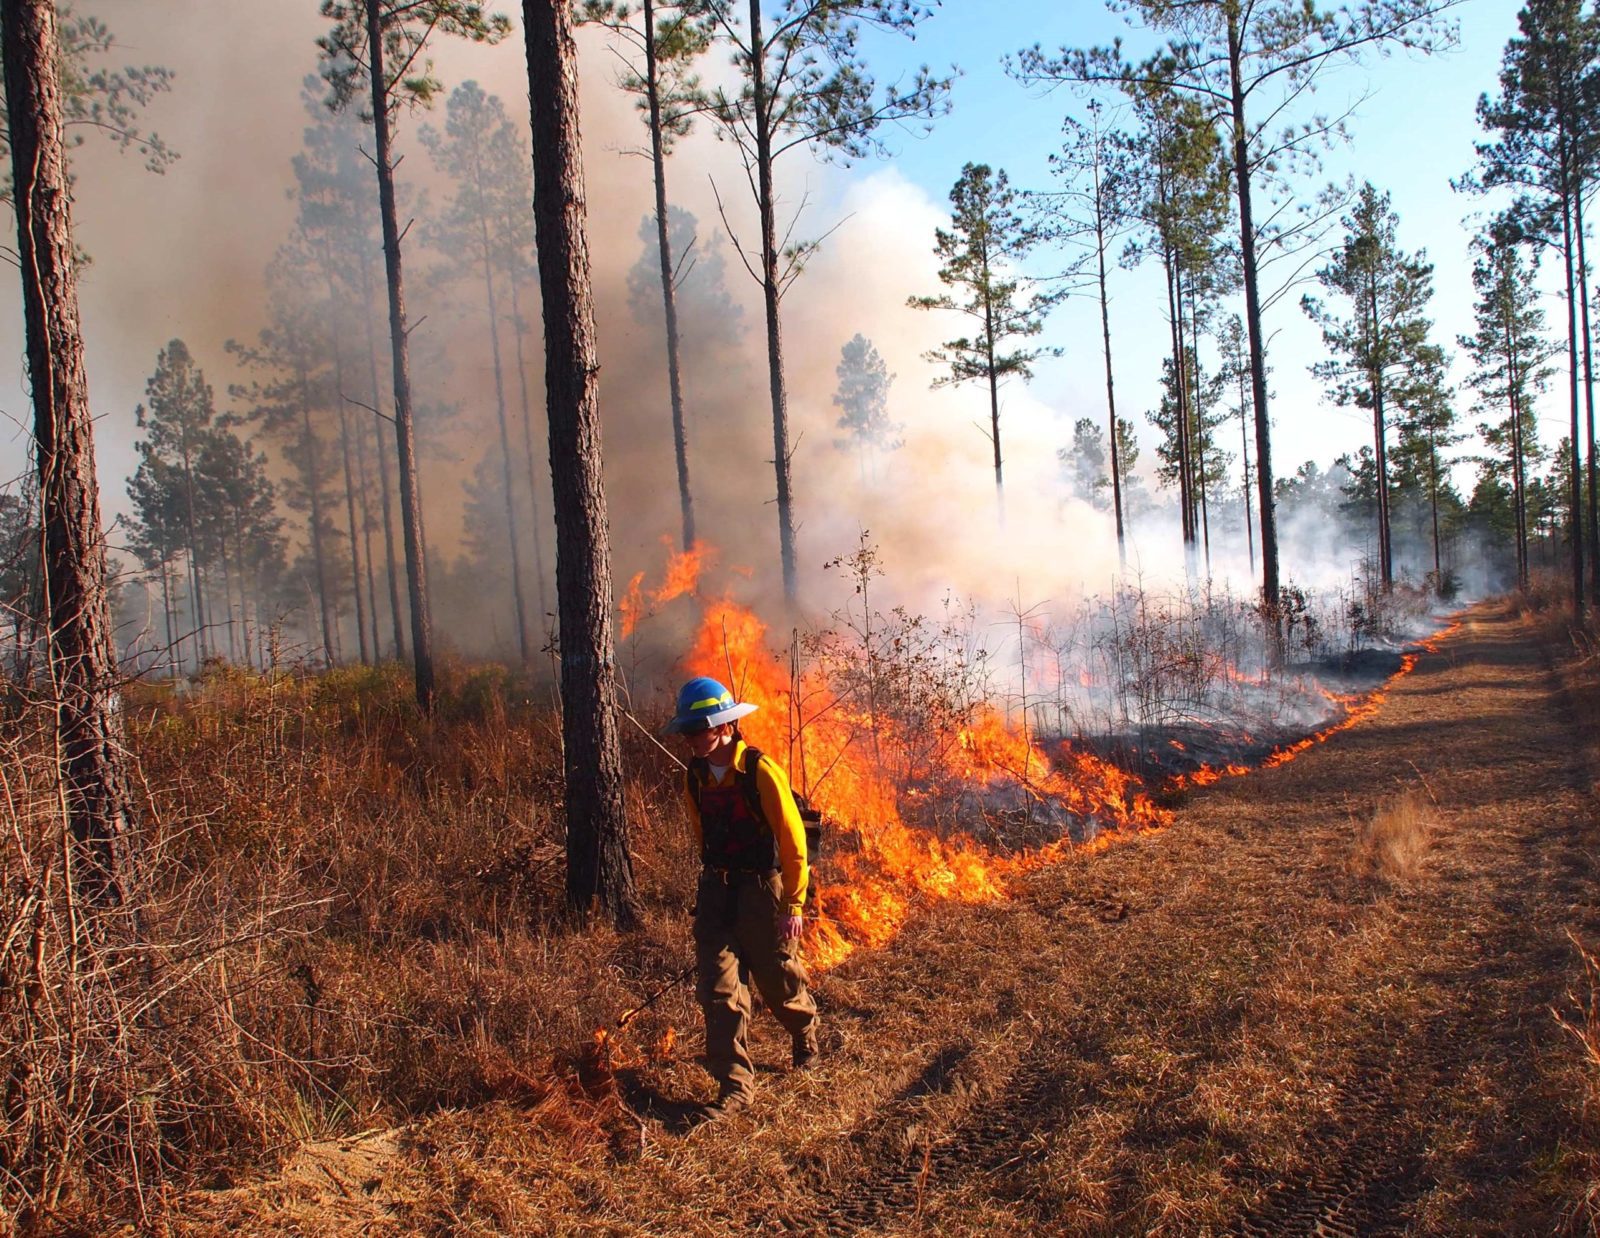 An Orianne Society fire tech lays down a line of fire pulling nicely off the firebreak. Photo by Randy Tate.